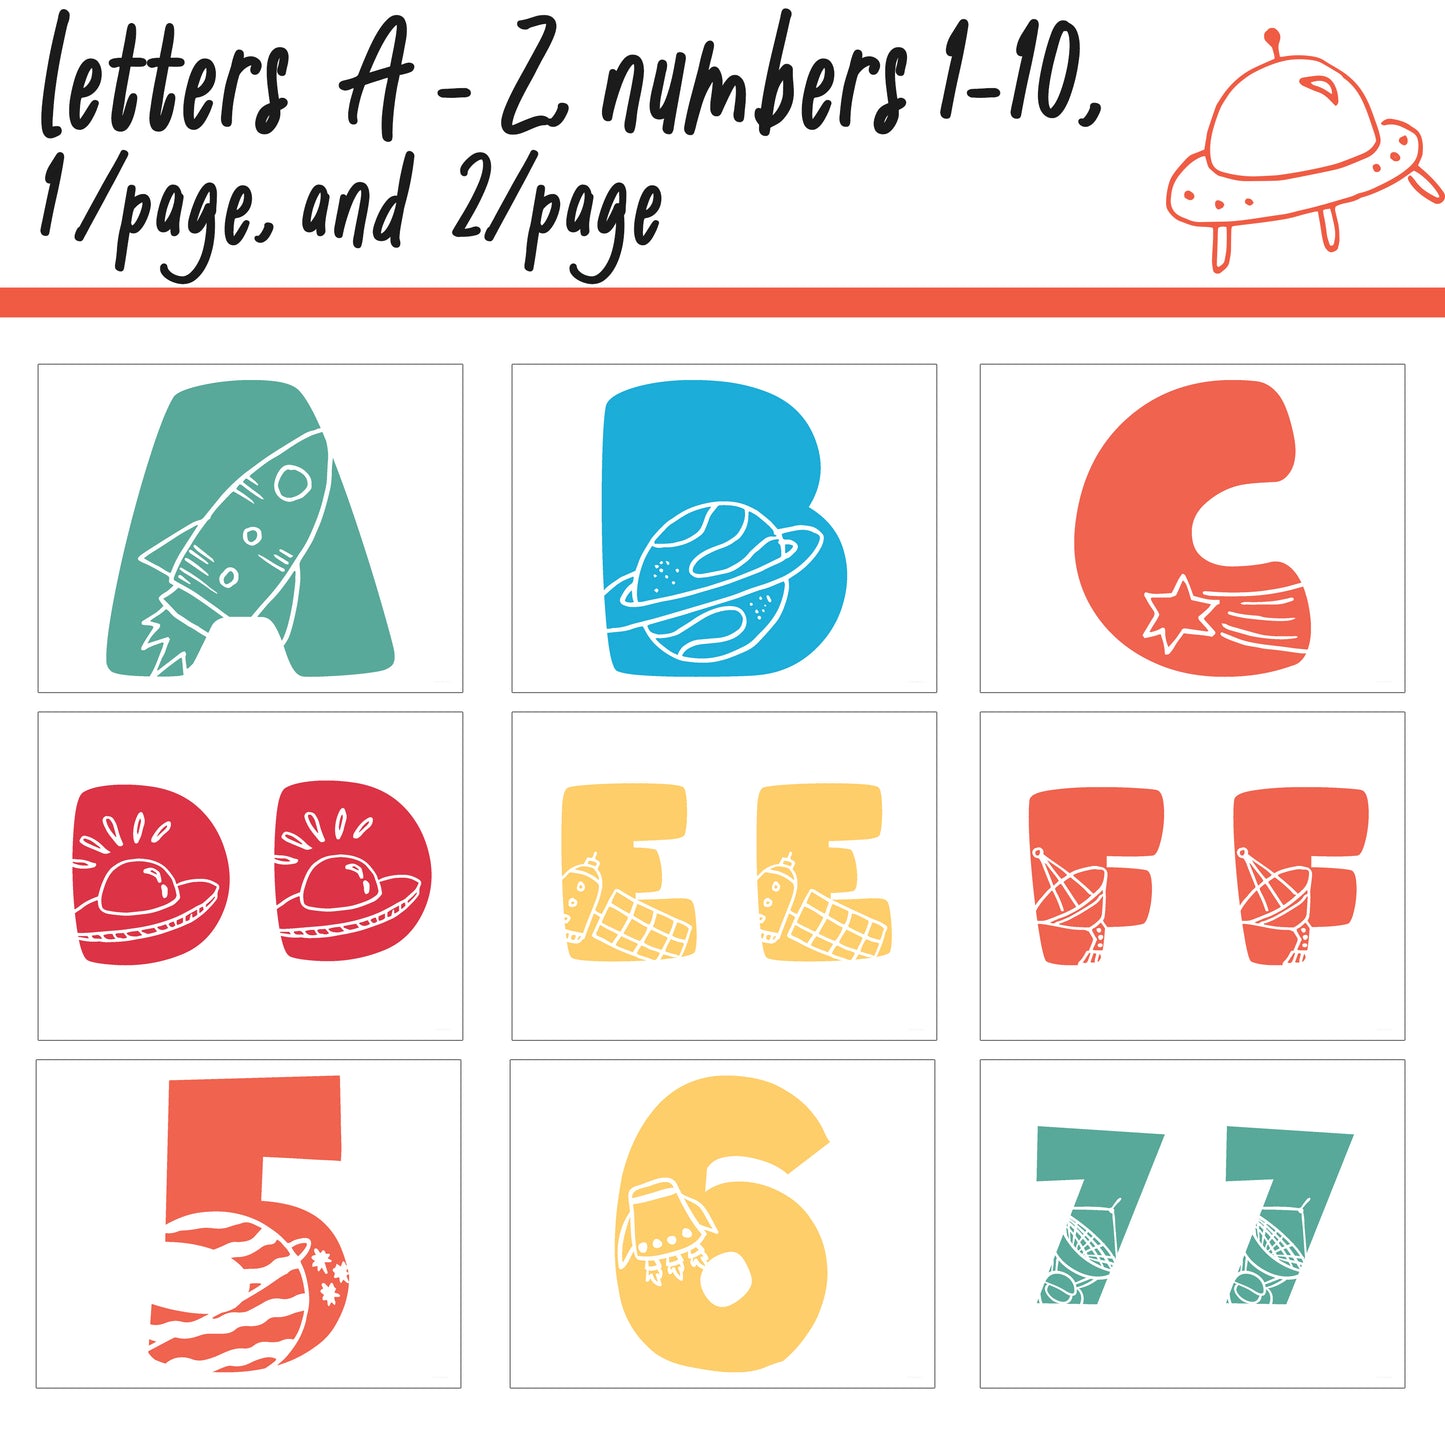 Space Bulletin Board Letters | A - Z, Letters and Numbers,1 and 2 Per Page, Colorful Classroom Decor